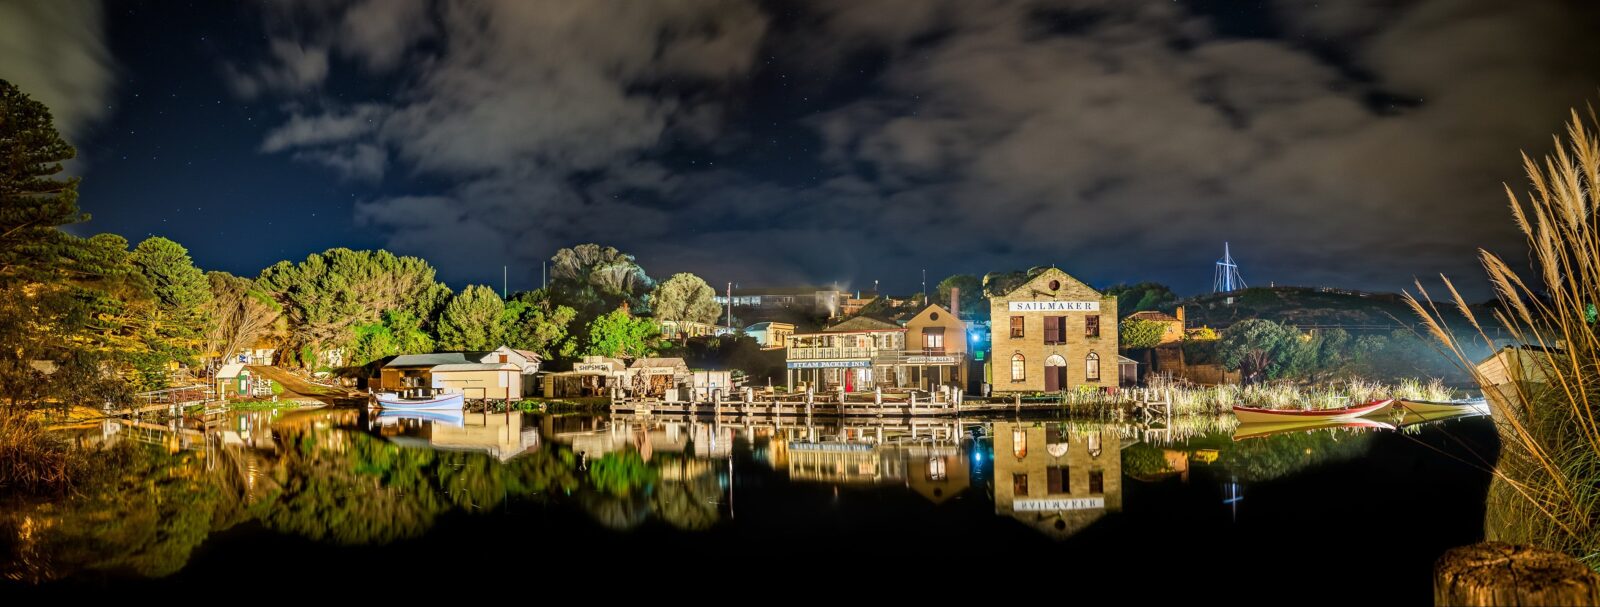 Flagstaff Hill Maritime Village and Shipwrecked Sound and Laser Show